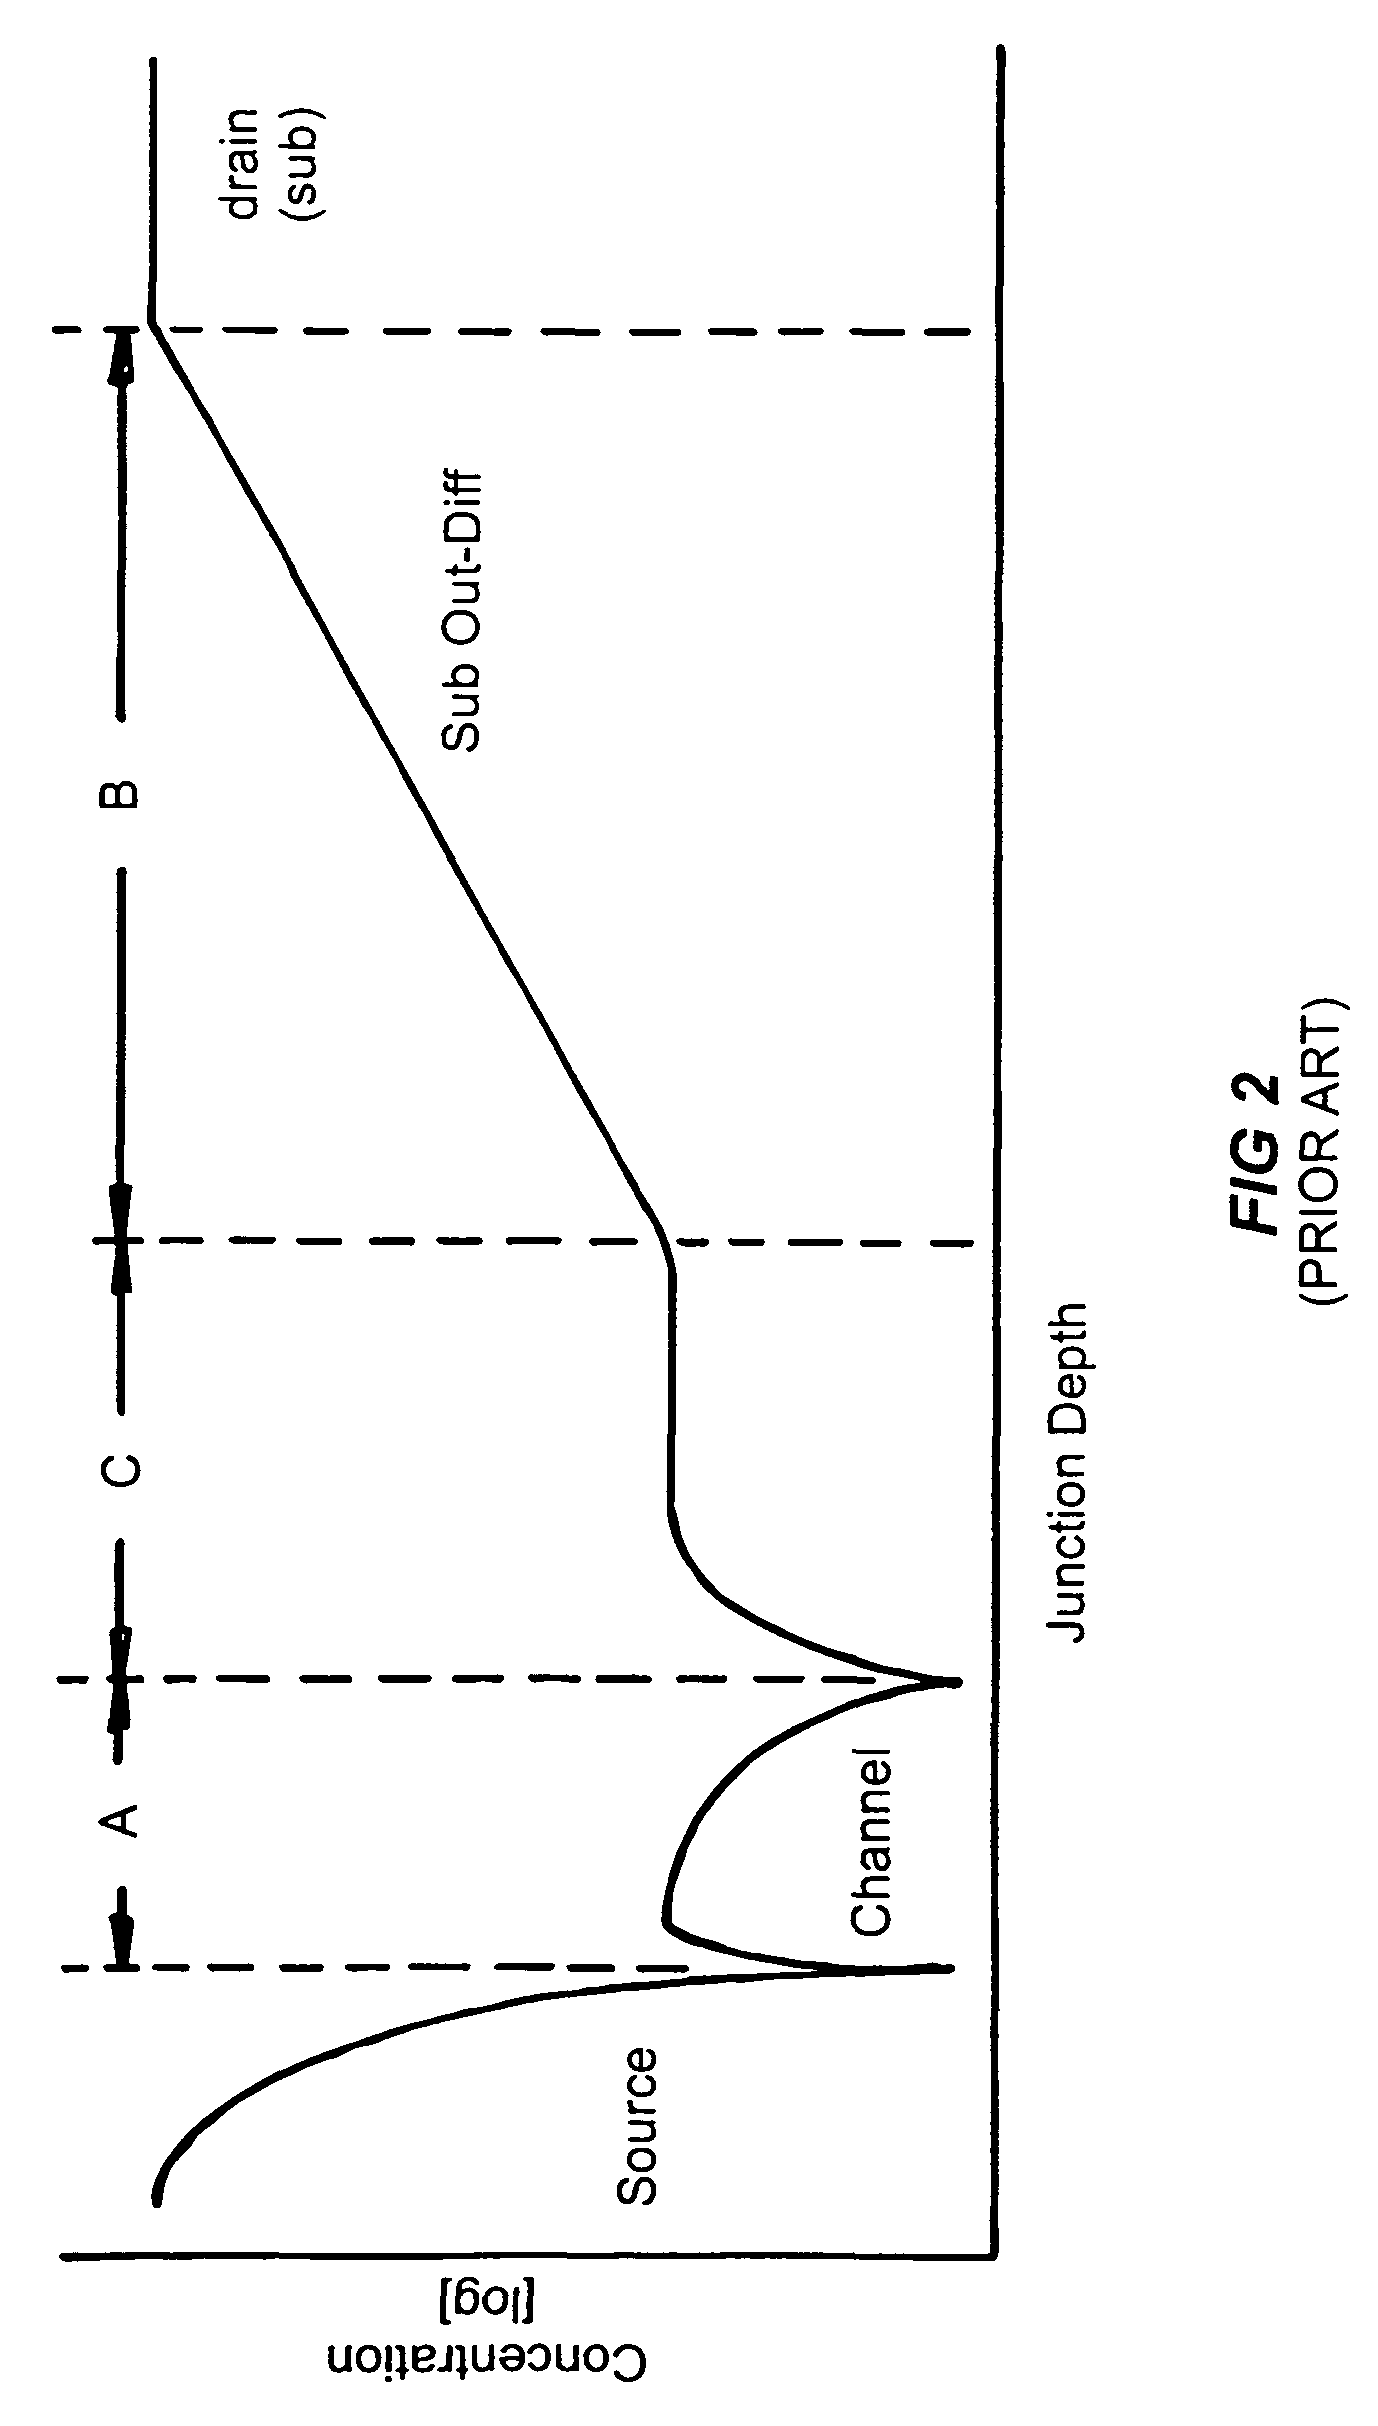 Method of forming a FET having ultra-low on-resistance and low gate charge